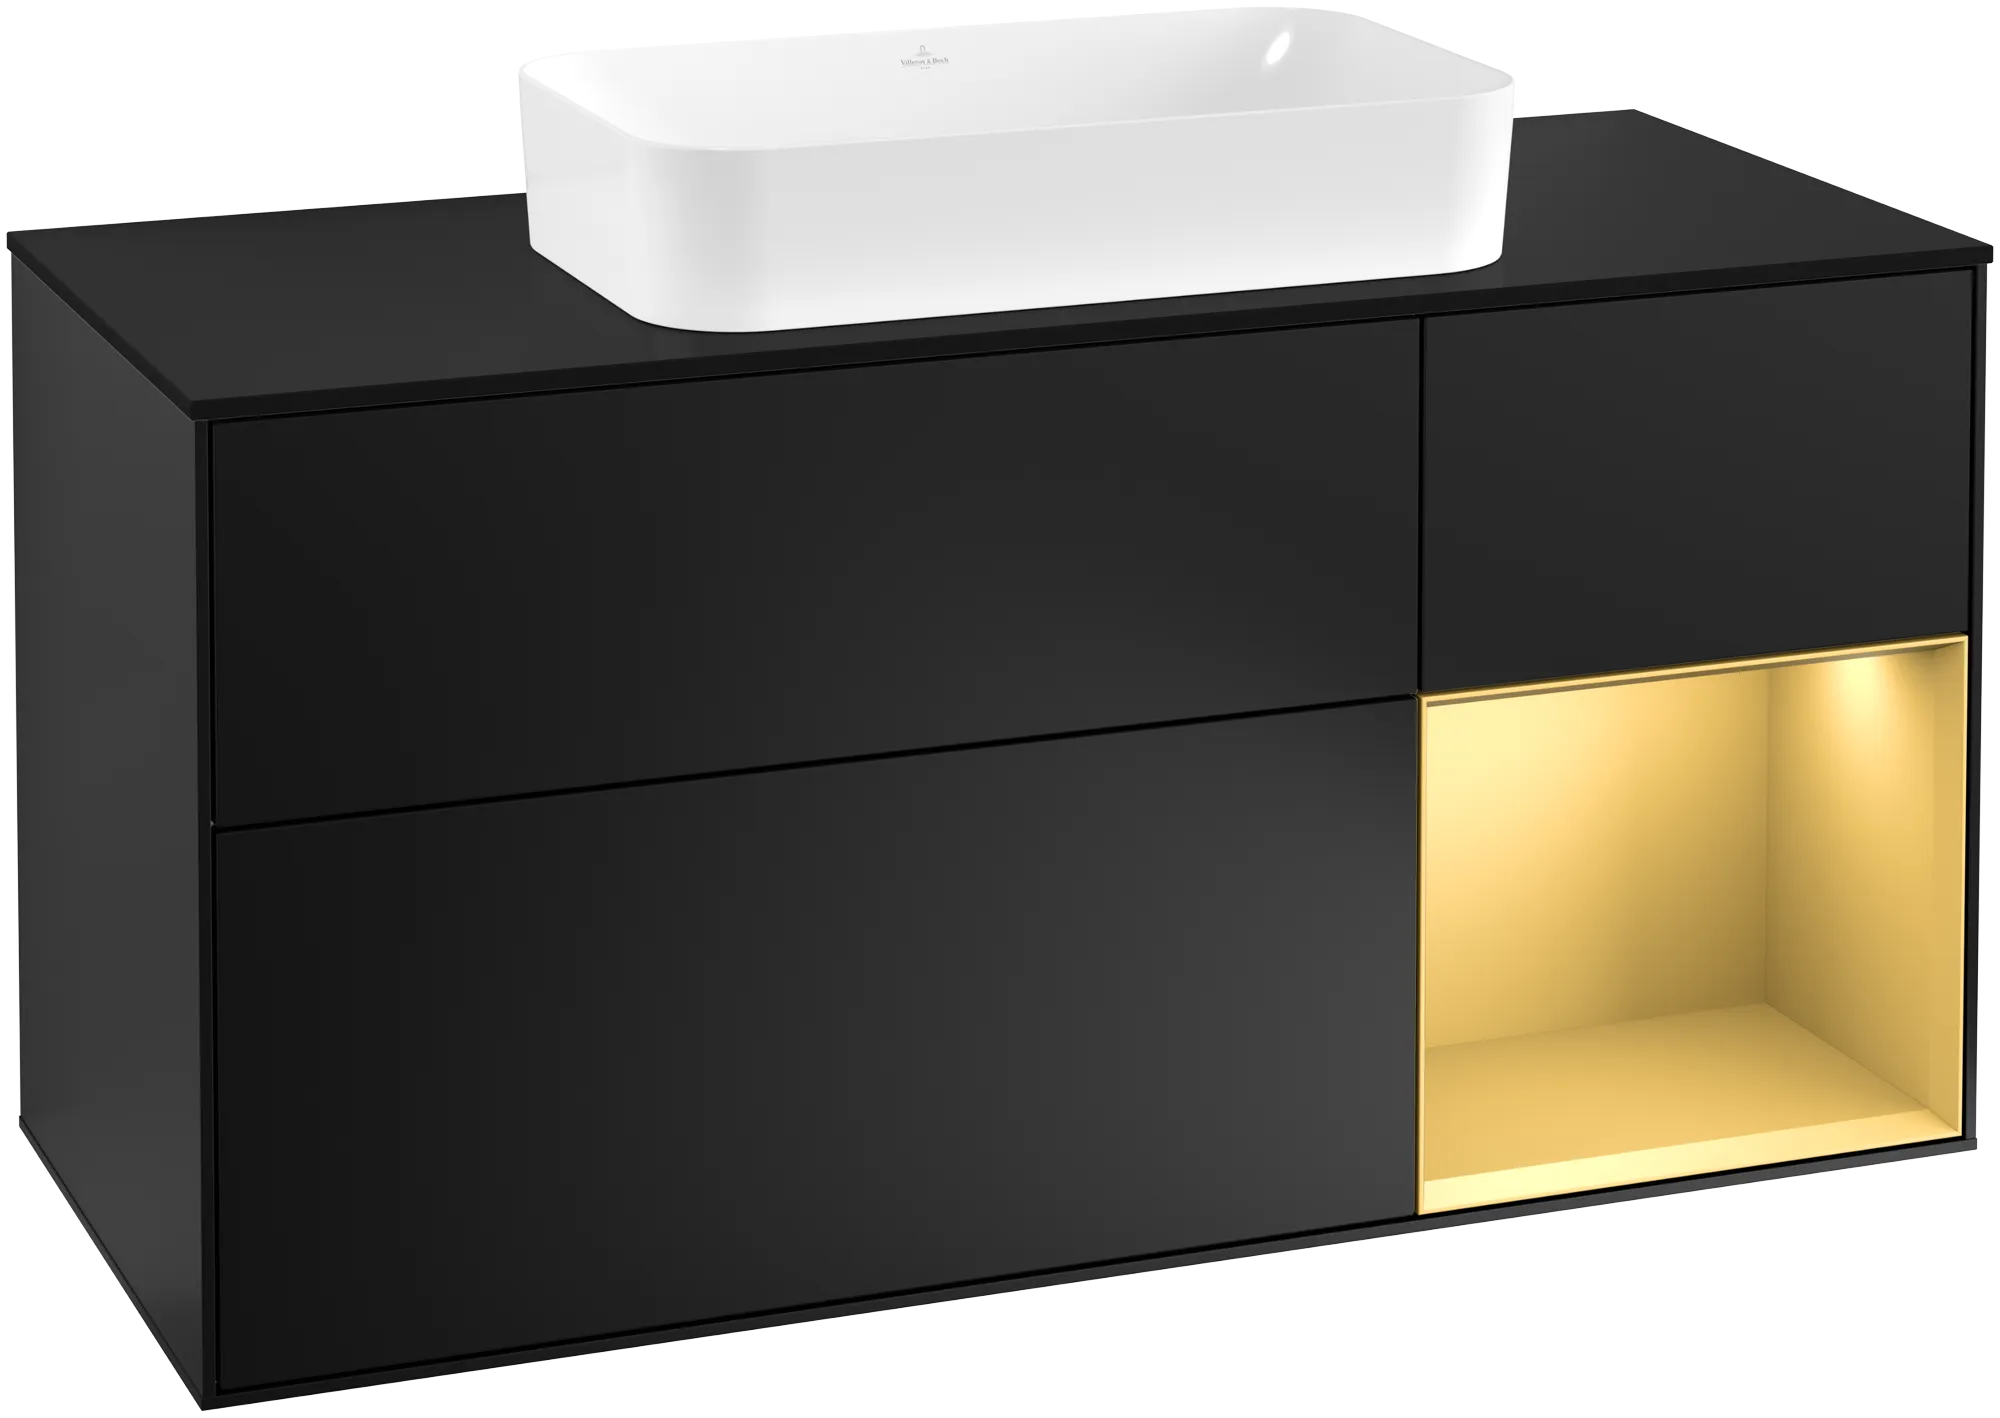 Picture of VILLEROY BOCH Finion Vanity unit, with lighting, 3 pull-out compartments, 1200 x 603 x 501 mm, Black Matt Lacquer / Gold Matt Lacquer / Glass Black Matt #G302HFPD